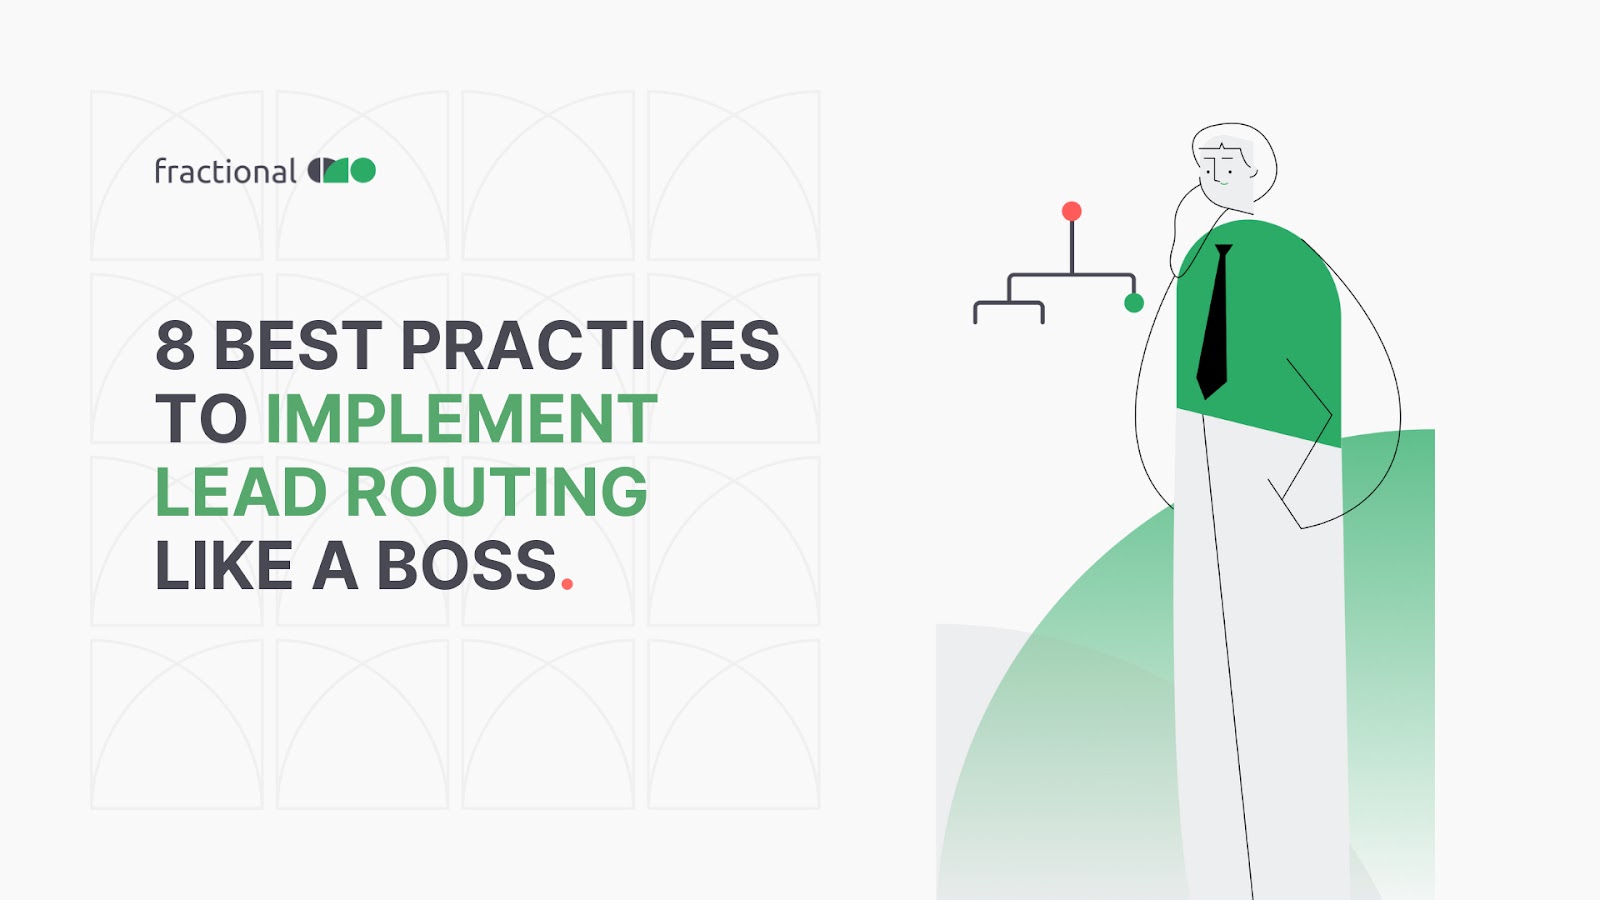 8 best practices to implement lead routing like a boss